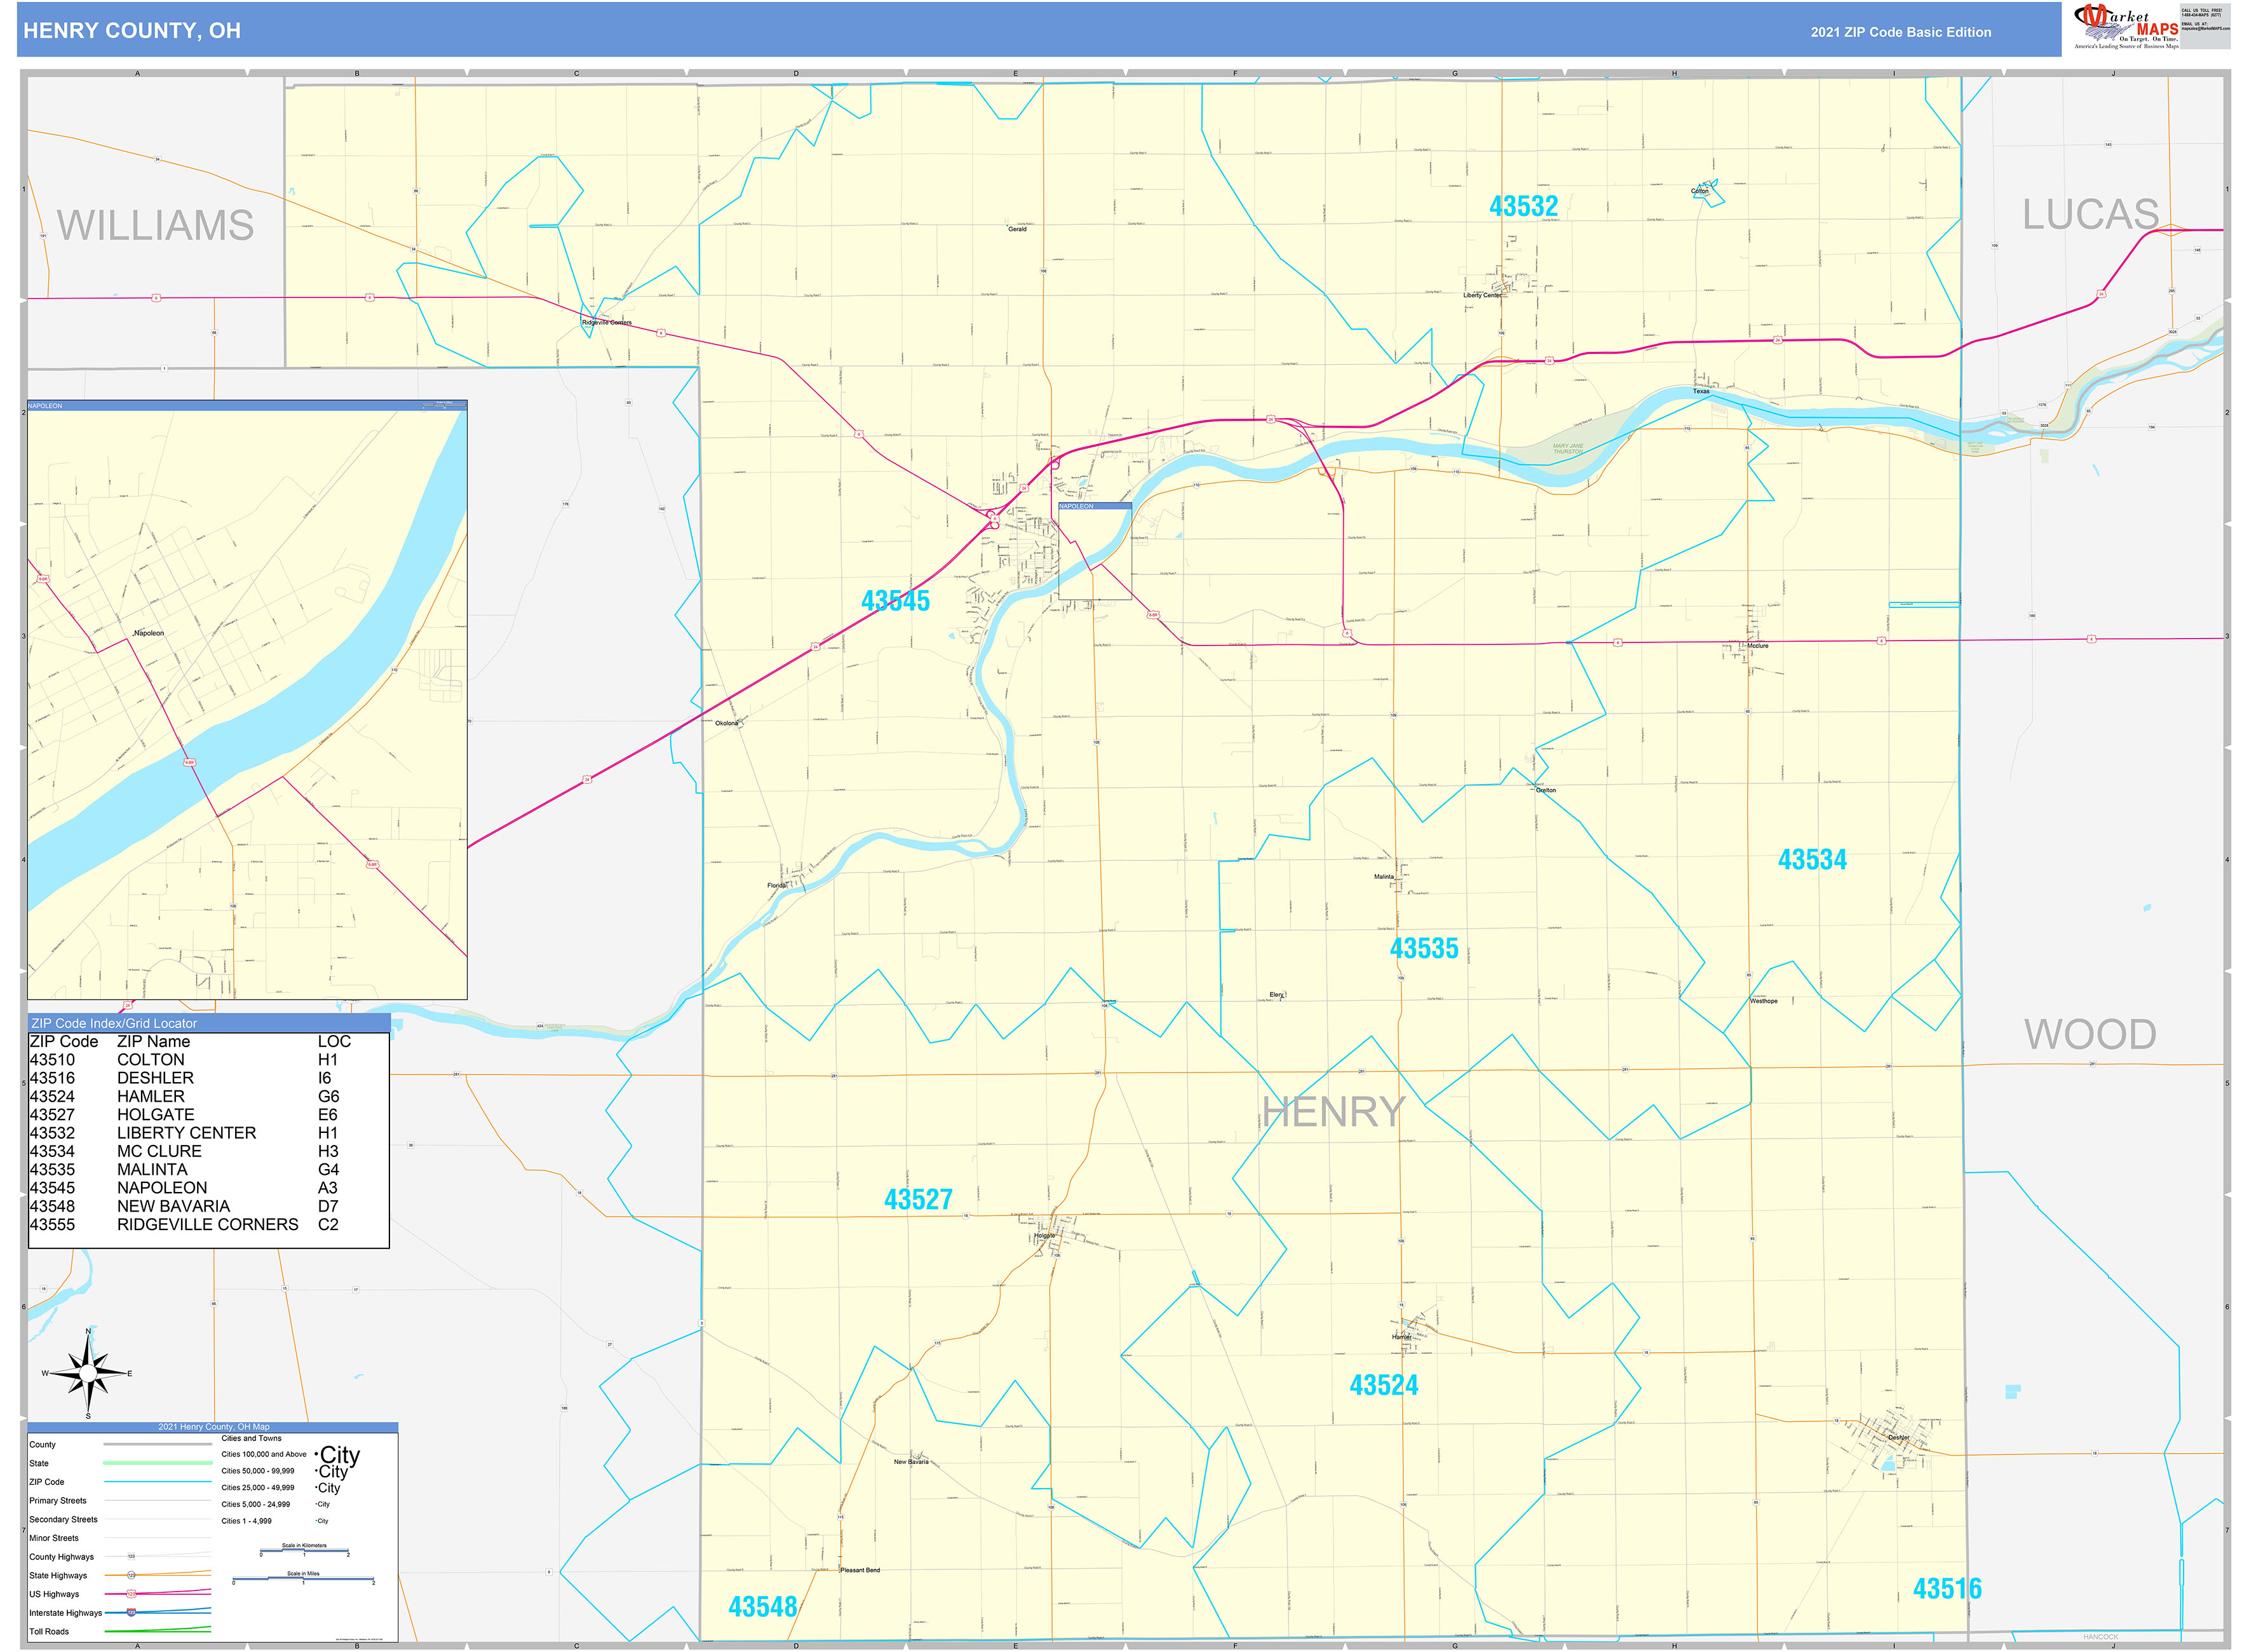 Henry County, OH Zip Code Wall Map Basic Style by MarketMAPS MapSales